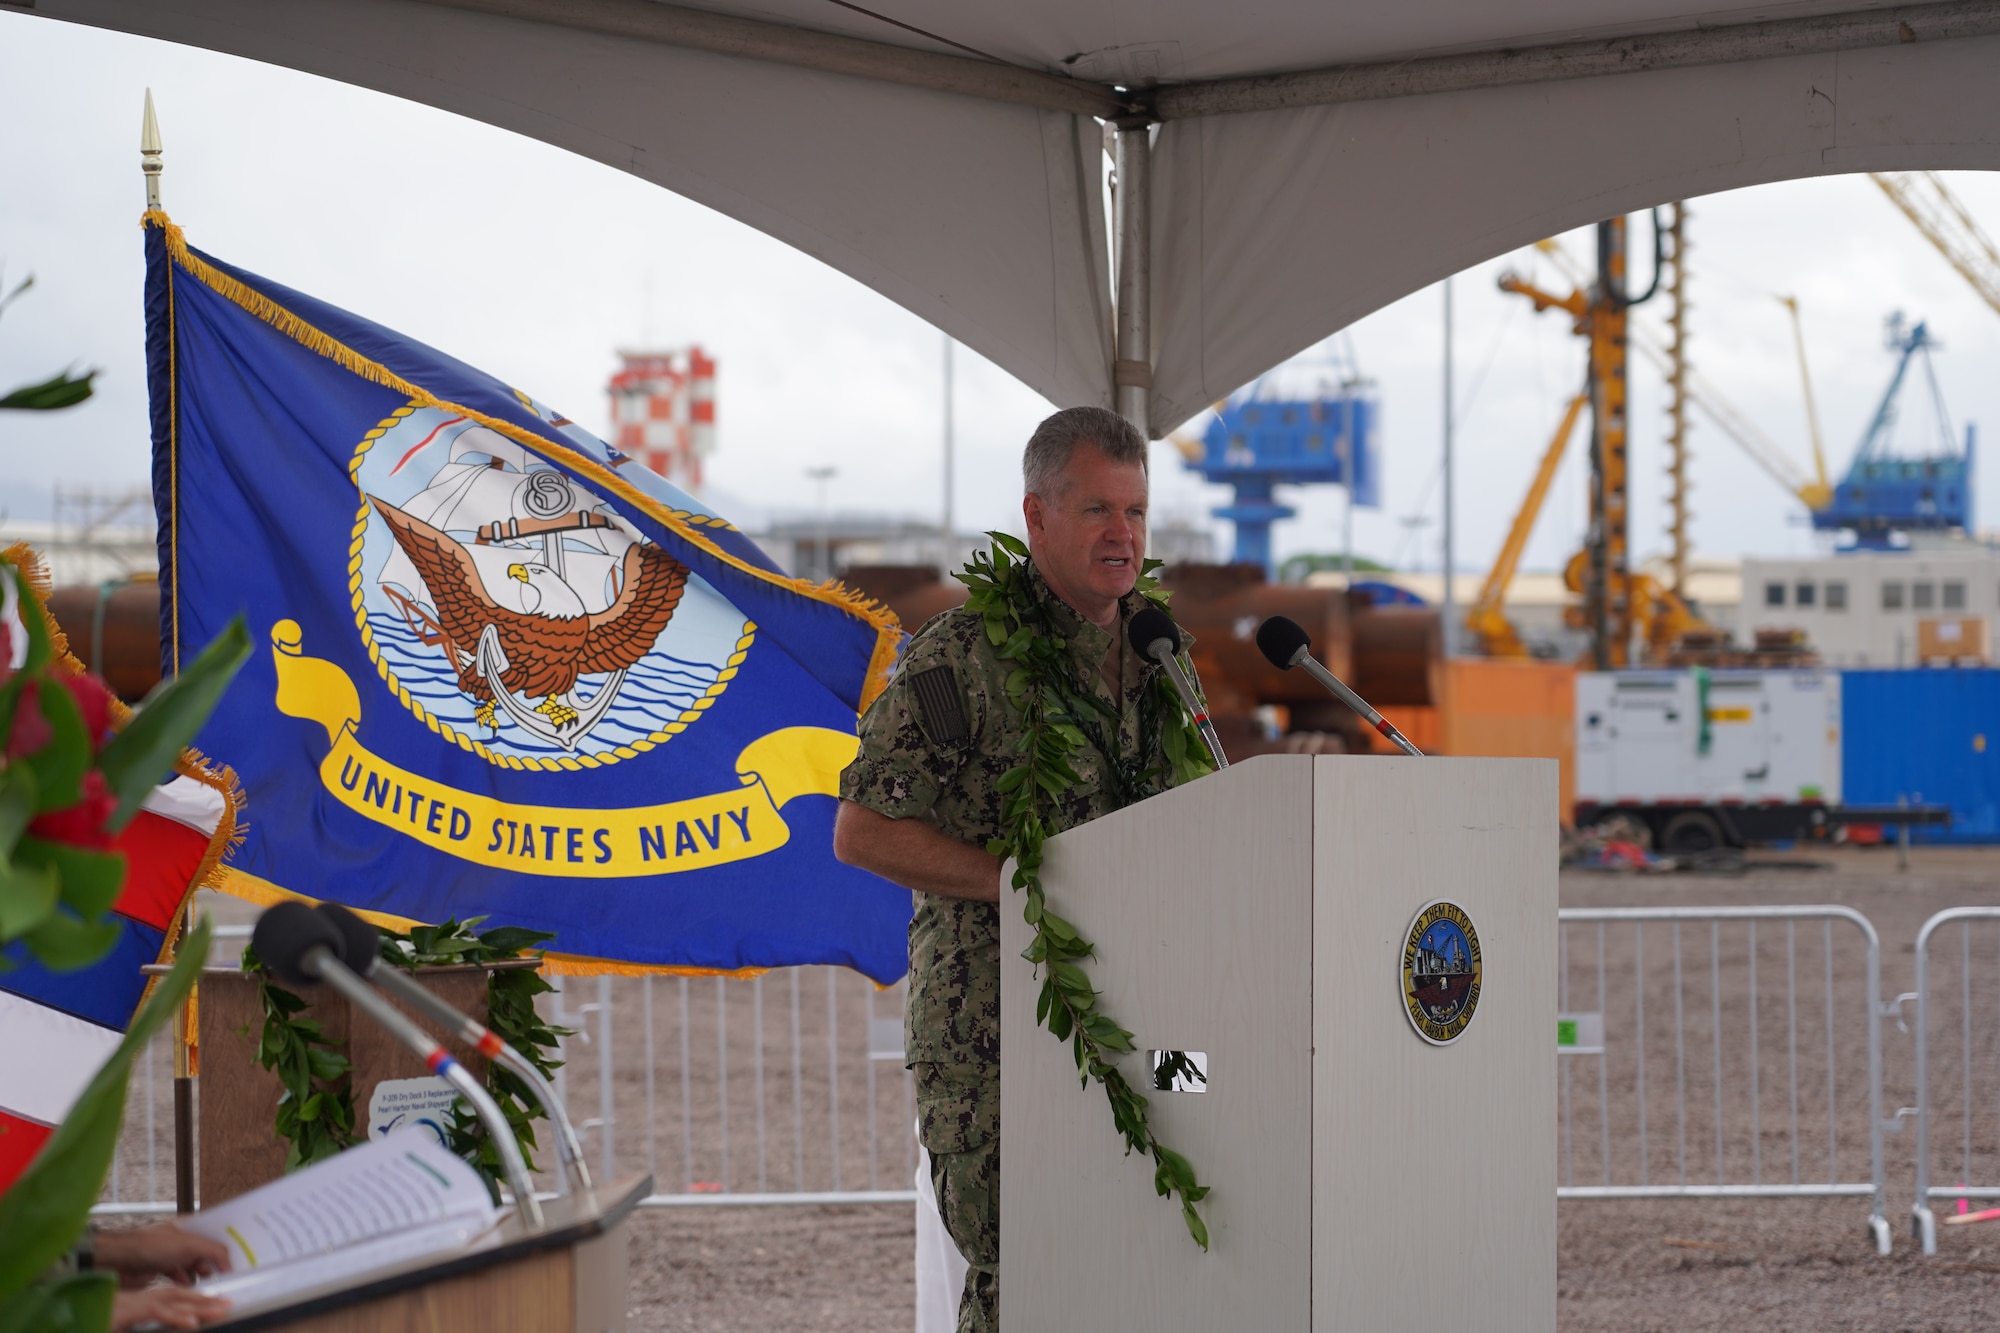 240224-N-EL904-0011 PEARL HARBOR, Hawaii – Adm. Samuel Paparo, Commander, U.S. Pacific Fleet, provides remarks at the Pearl Harbor Naval Shipyard & Intermediate Maintenance Facility (PHNSY & IMF) Dry Dock 5 Anchoring Ceremony Feb. 24, 2024. The ceremony celebrated an early construction milestone, marking the installation of piles that will anchor the foundational footprint of Dry Dock 5 at PHNSY & IMF. This is the first graving dock built in Pearl Harbor since 1943 and the highest-value single construction project in the history of the Navy. The new dry dock will enhance PHNSY & IMF’s mission to repair, maintain, and modernize Navy fast-attack submarines and surface ships, keeping them Fit to Fight. U.S. Navy photo by Justice Vannatt